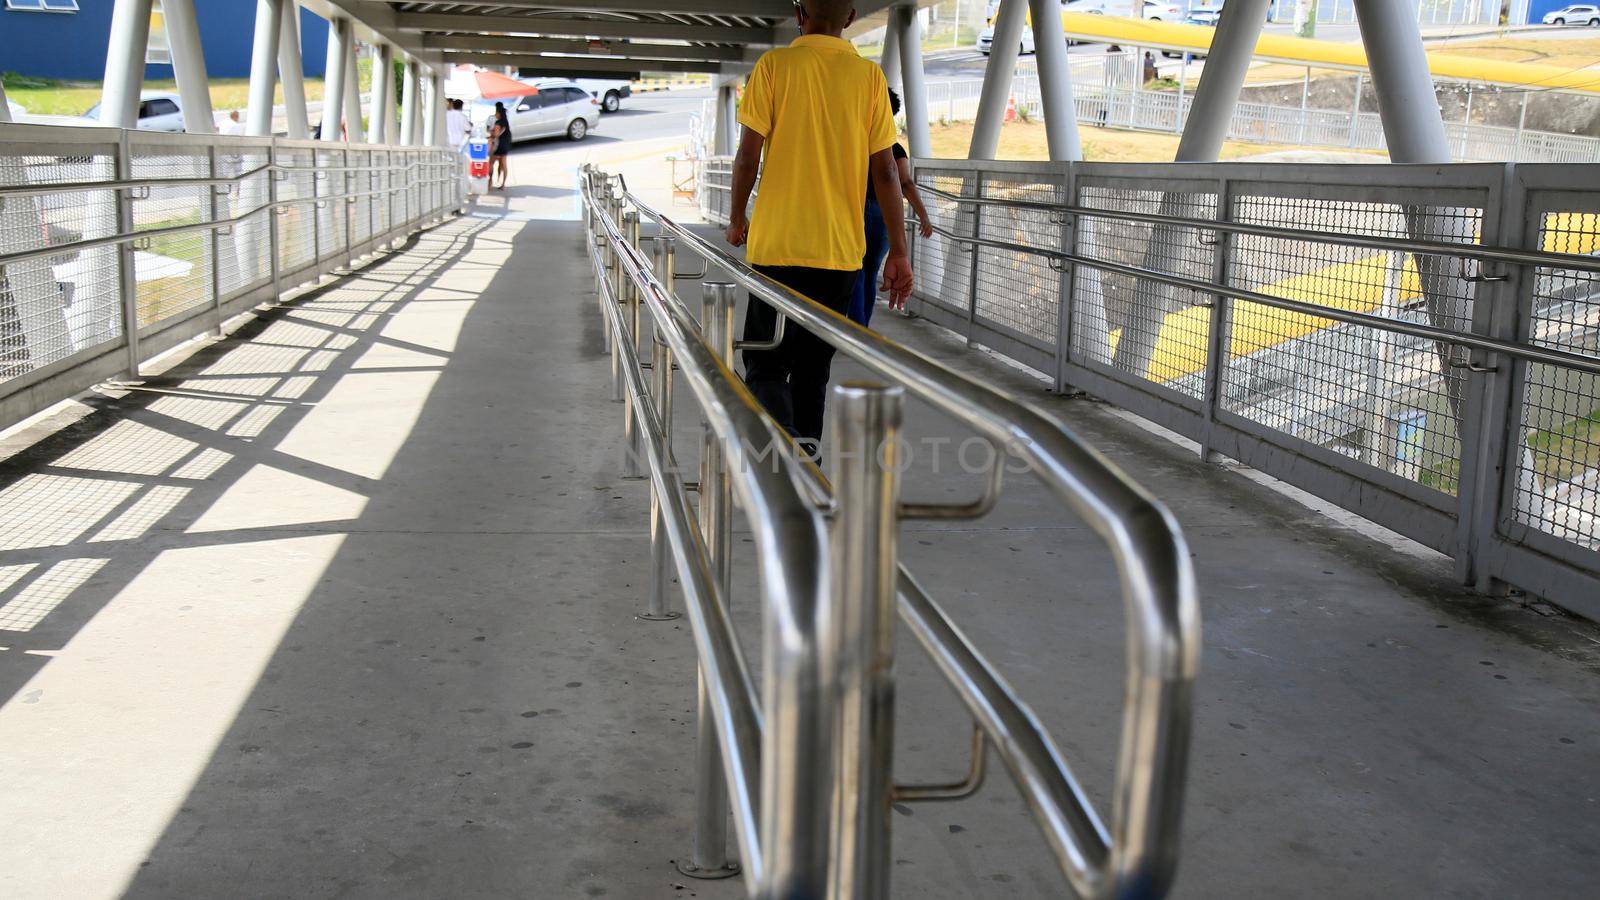 salvador, bahia, brazil - january 8, 2021: people are seen passing by a handrail on a pedestrian walkway in the city of Salvador. The site is a source of contamination from the corona virus.